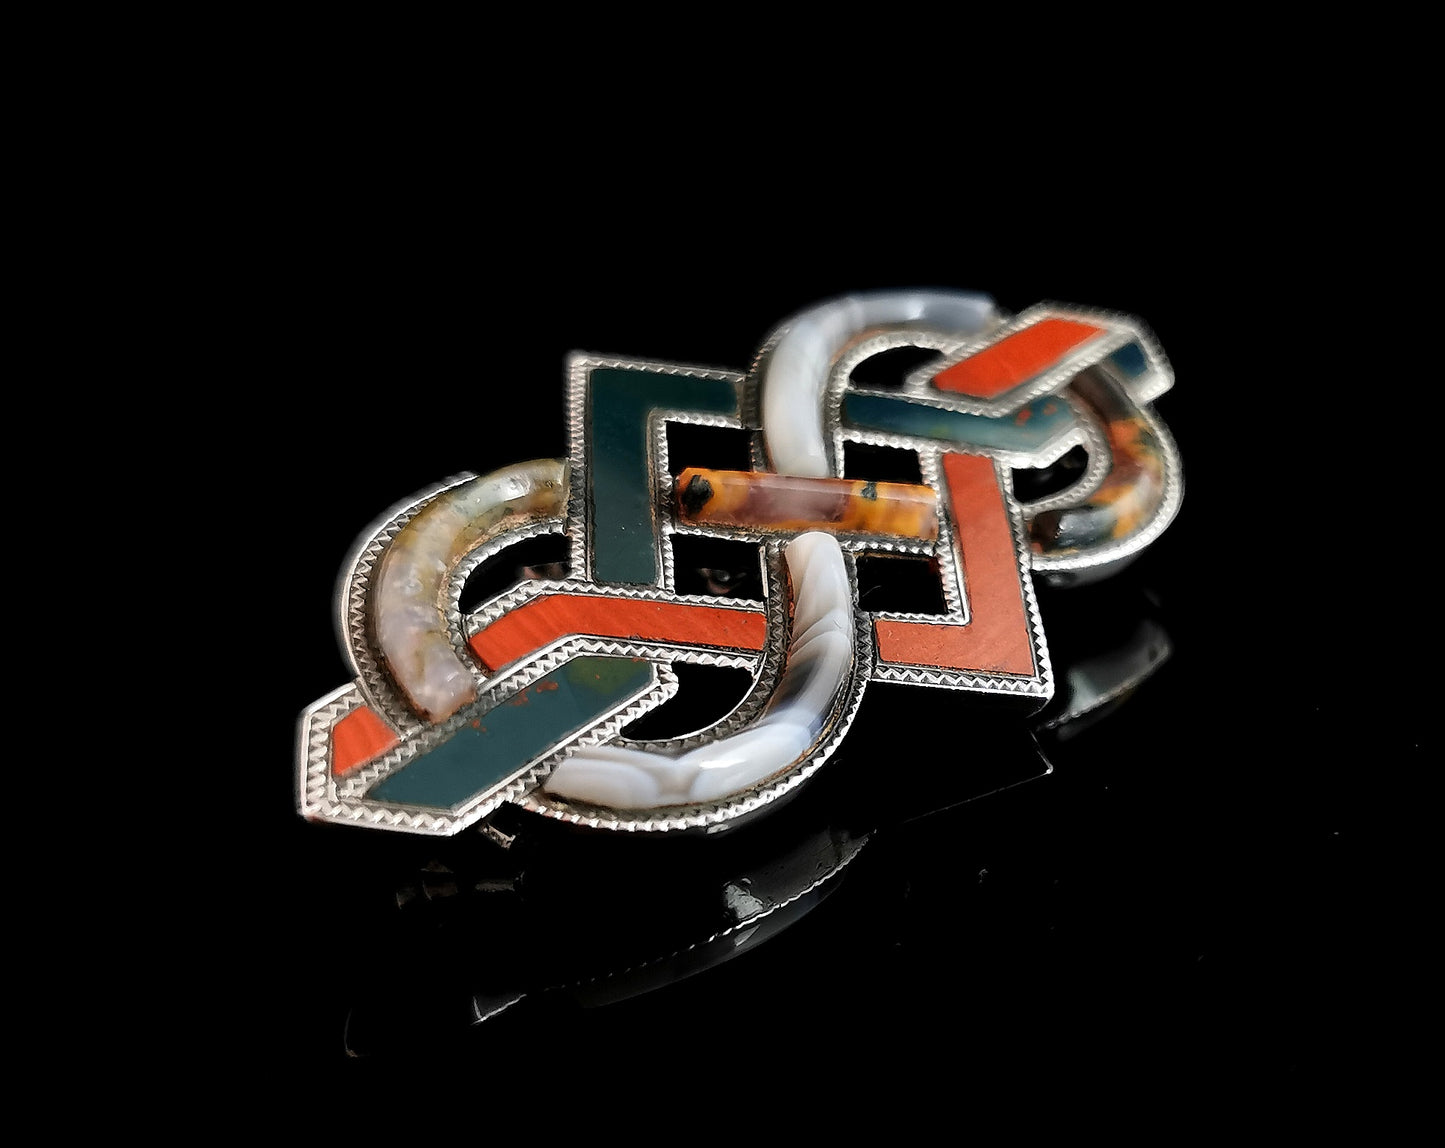 Victorian Scottish agate and Silver knot brooch